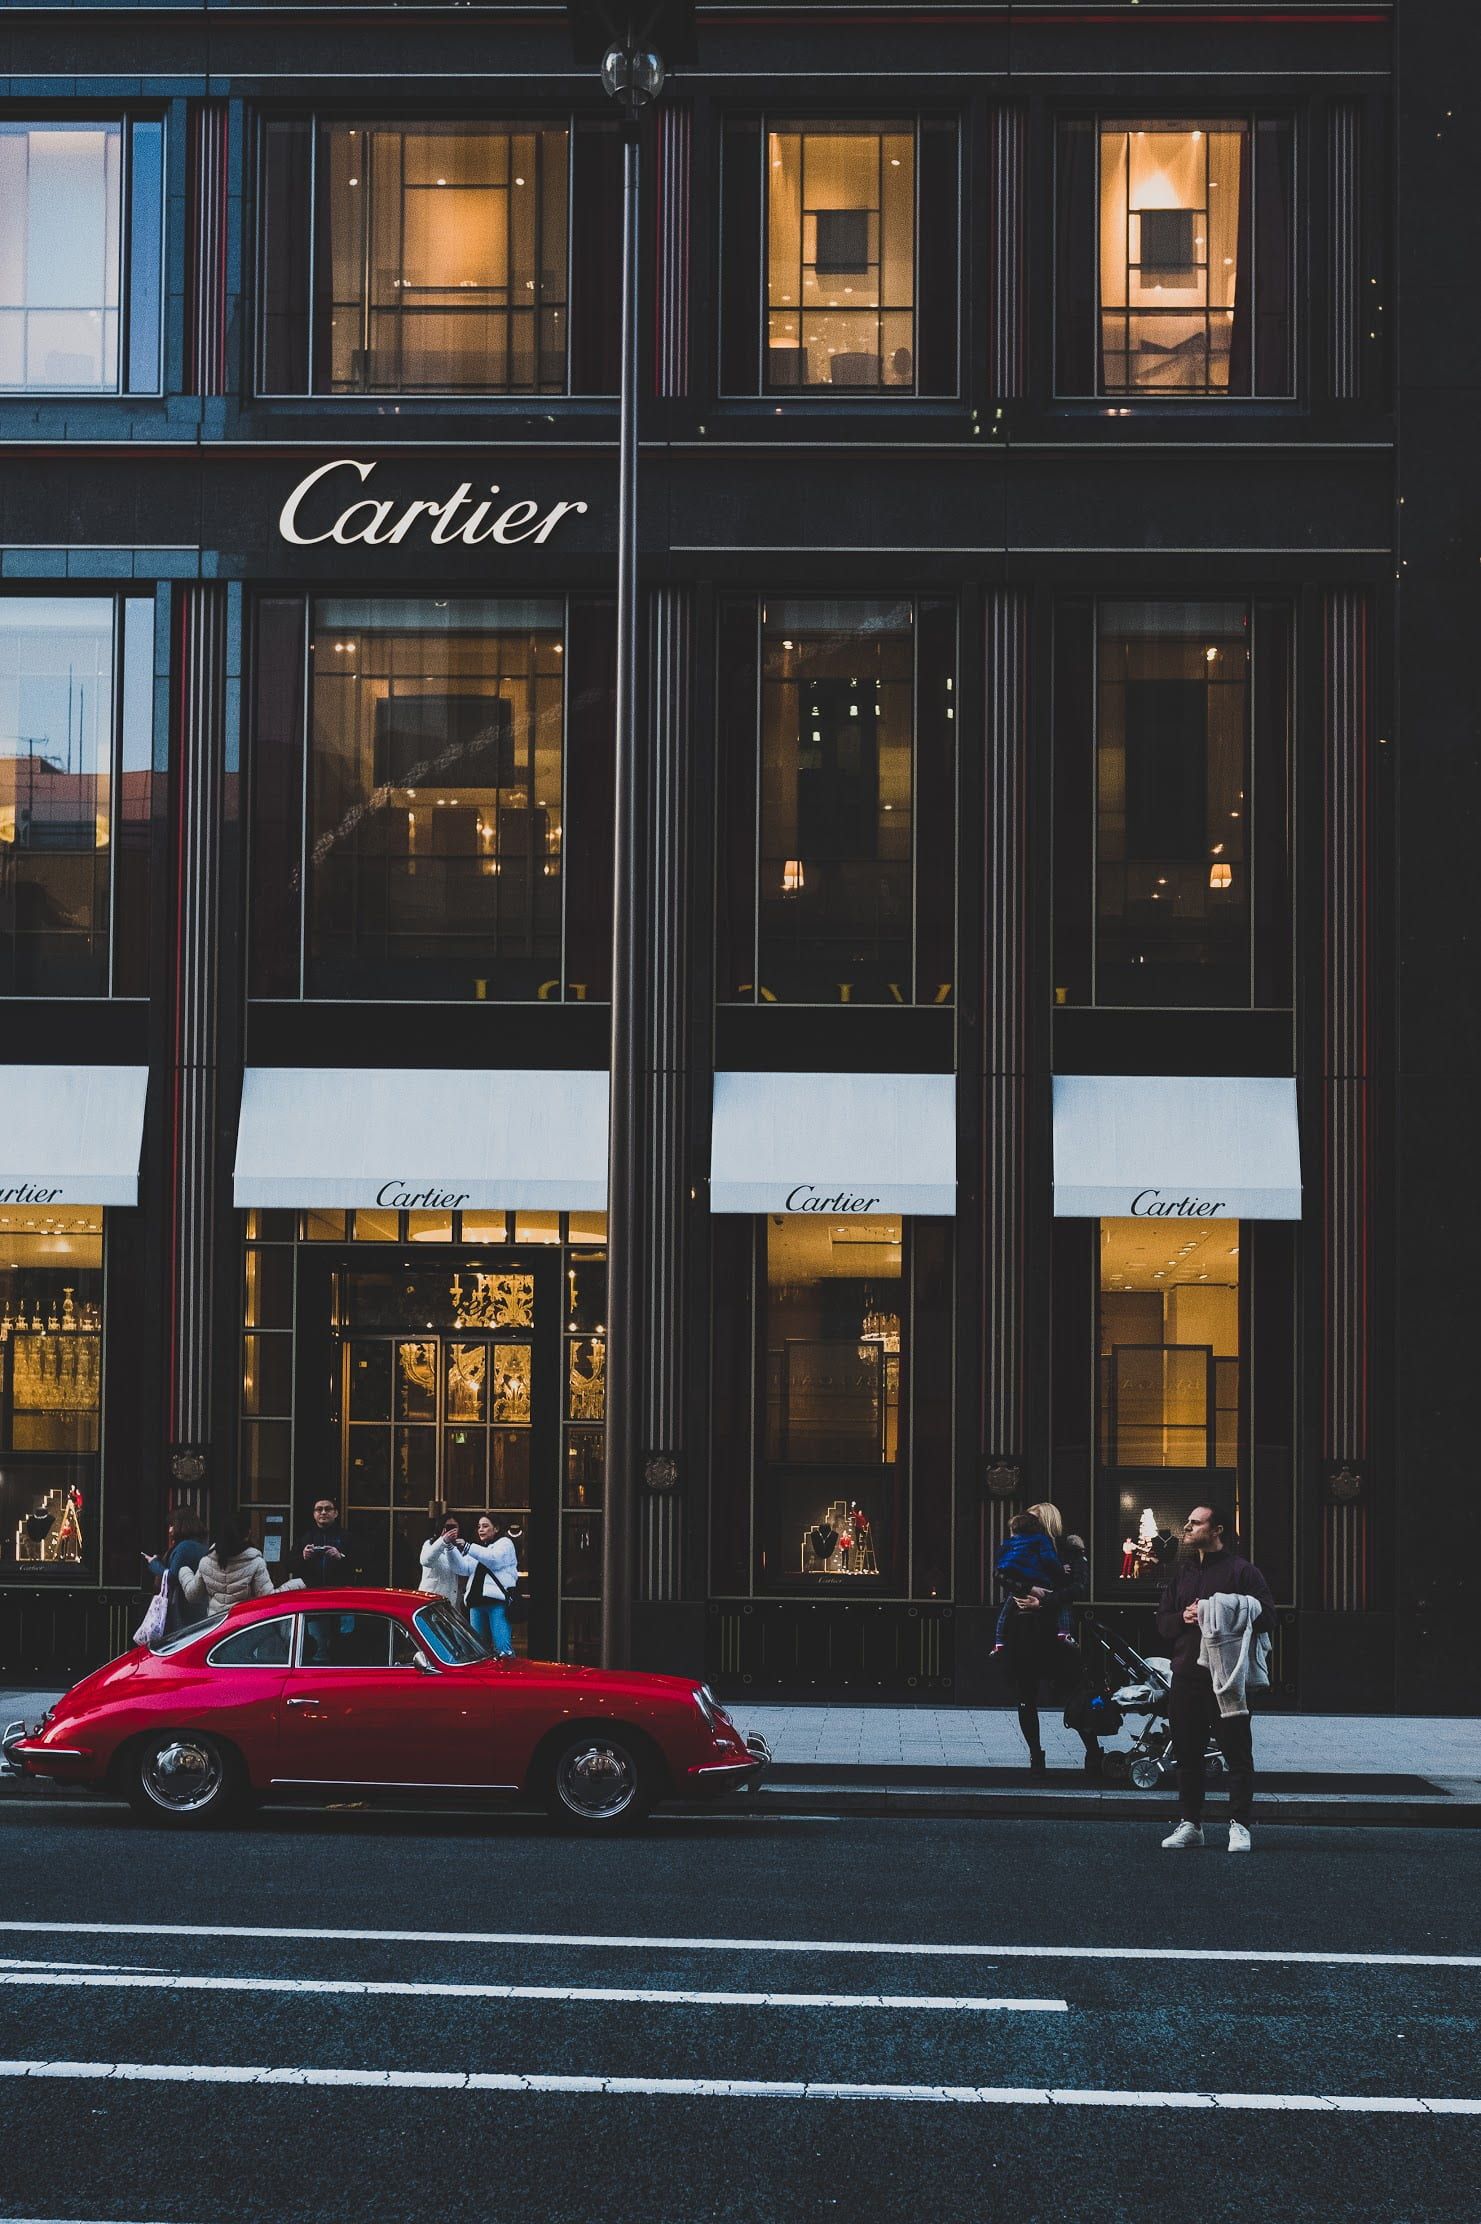 red coupe infront of cartier shop, people outside Cartier building #building #store #city #urban #car P #wallpa. City aesthetic, Luxury, Aesthetic wallpaper